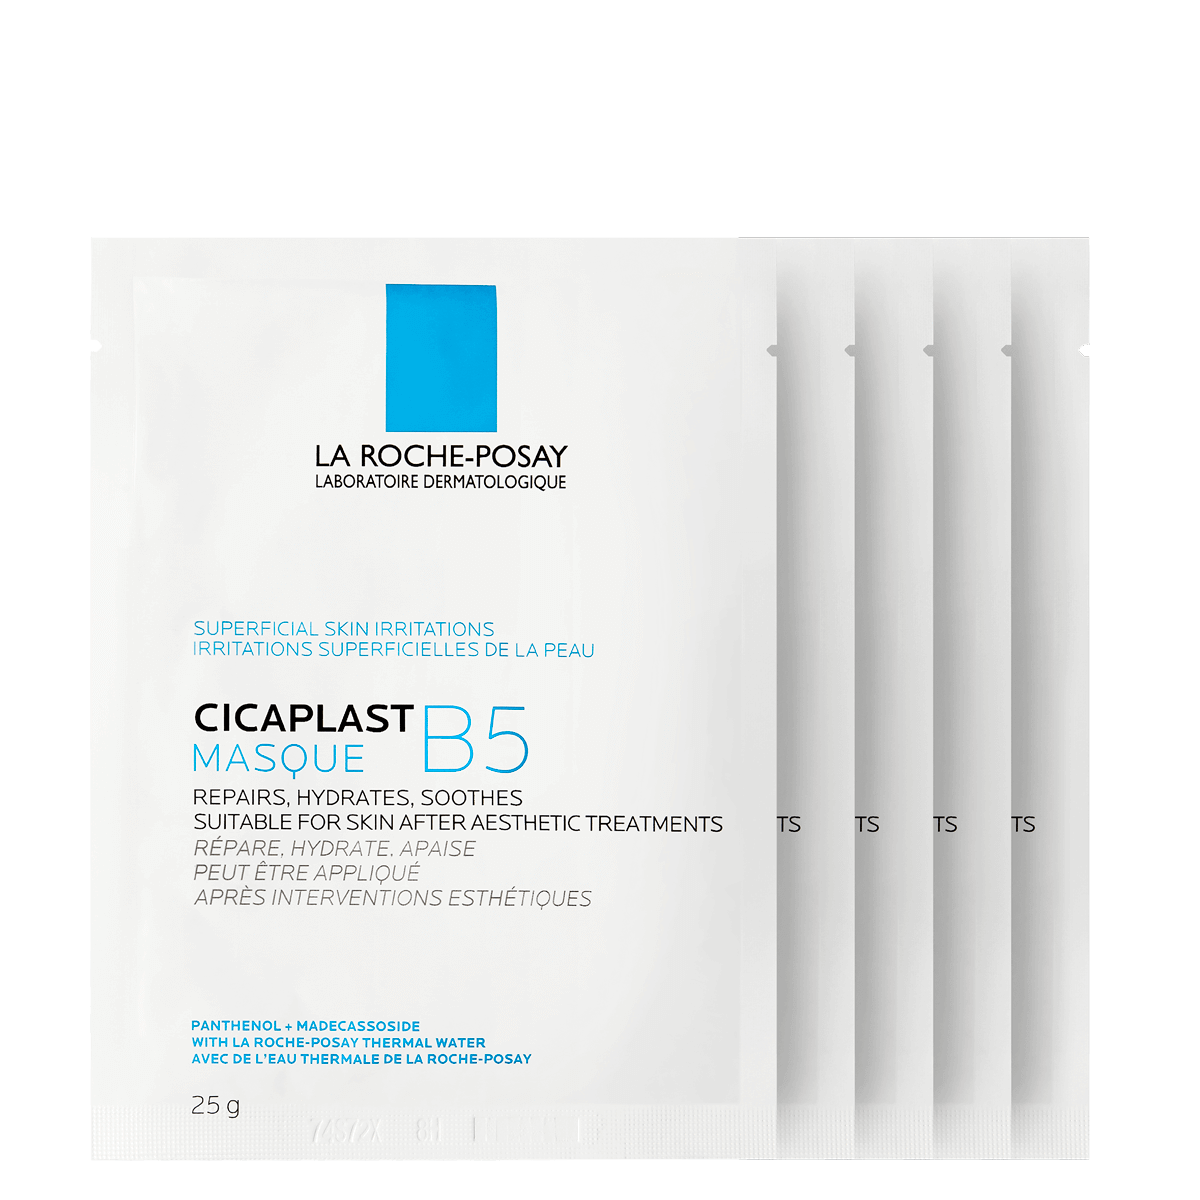 Cicaplast B5 masque product front view